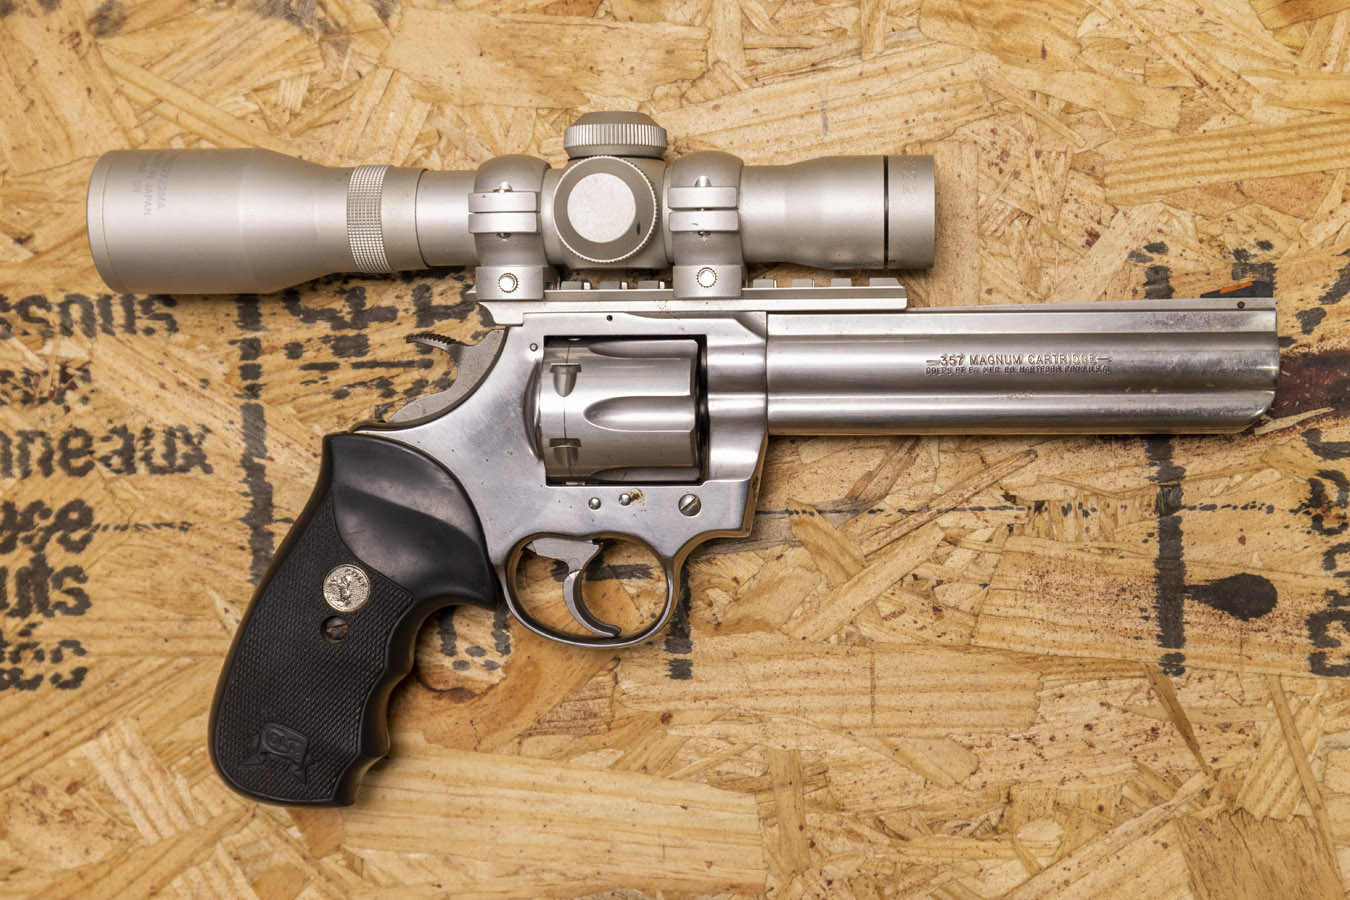 No. 11 Best Selling: COLT KING COBRA .357 MAGNUM POLICE TRADE-IN REVOLVER WITH OPTIC